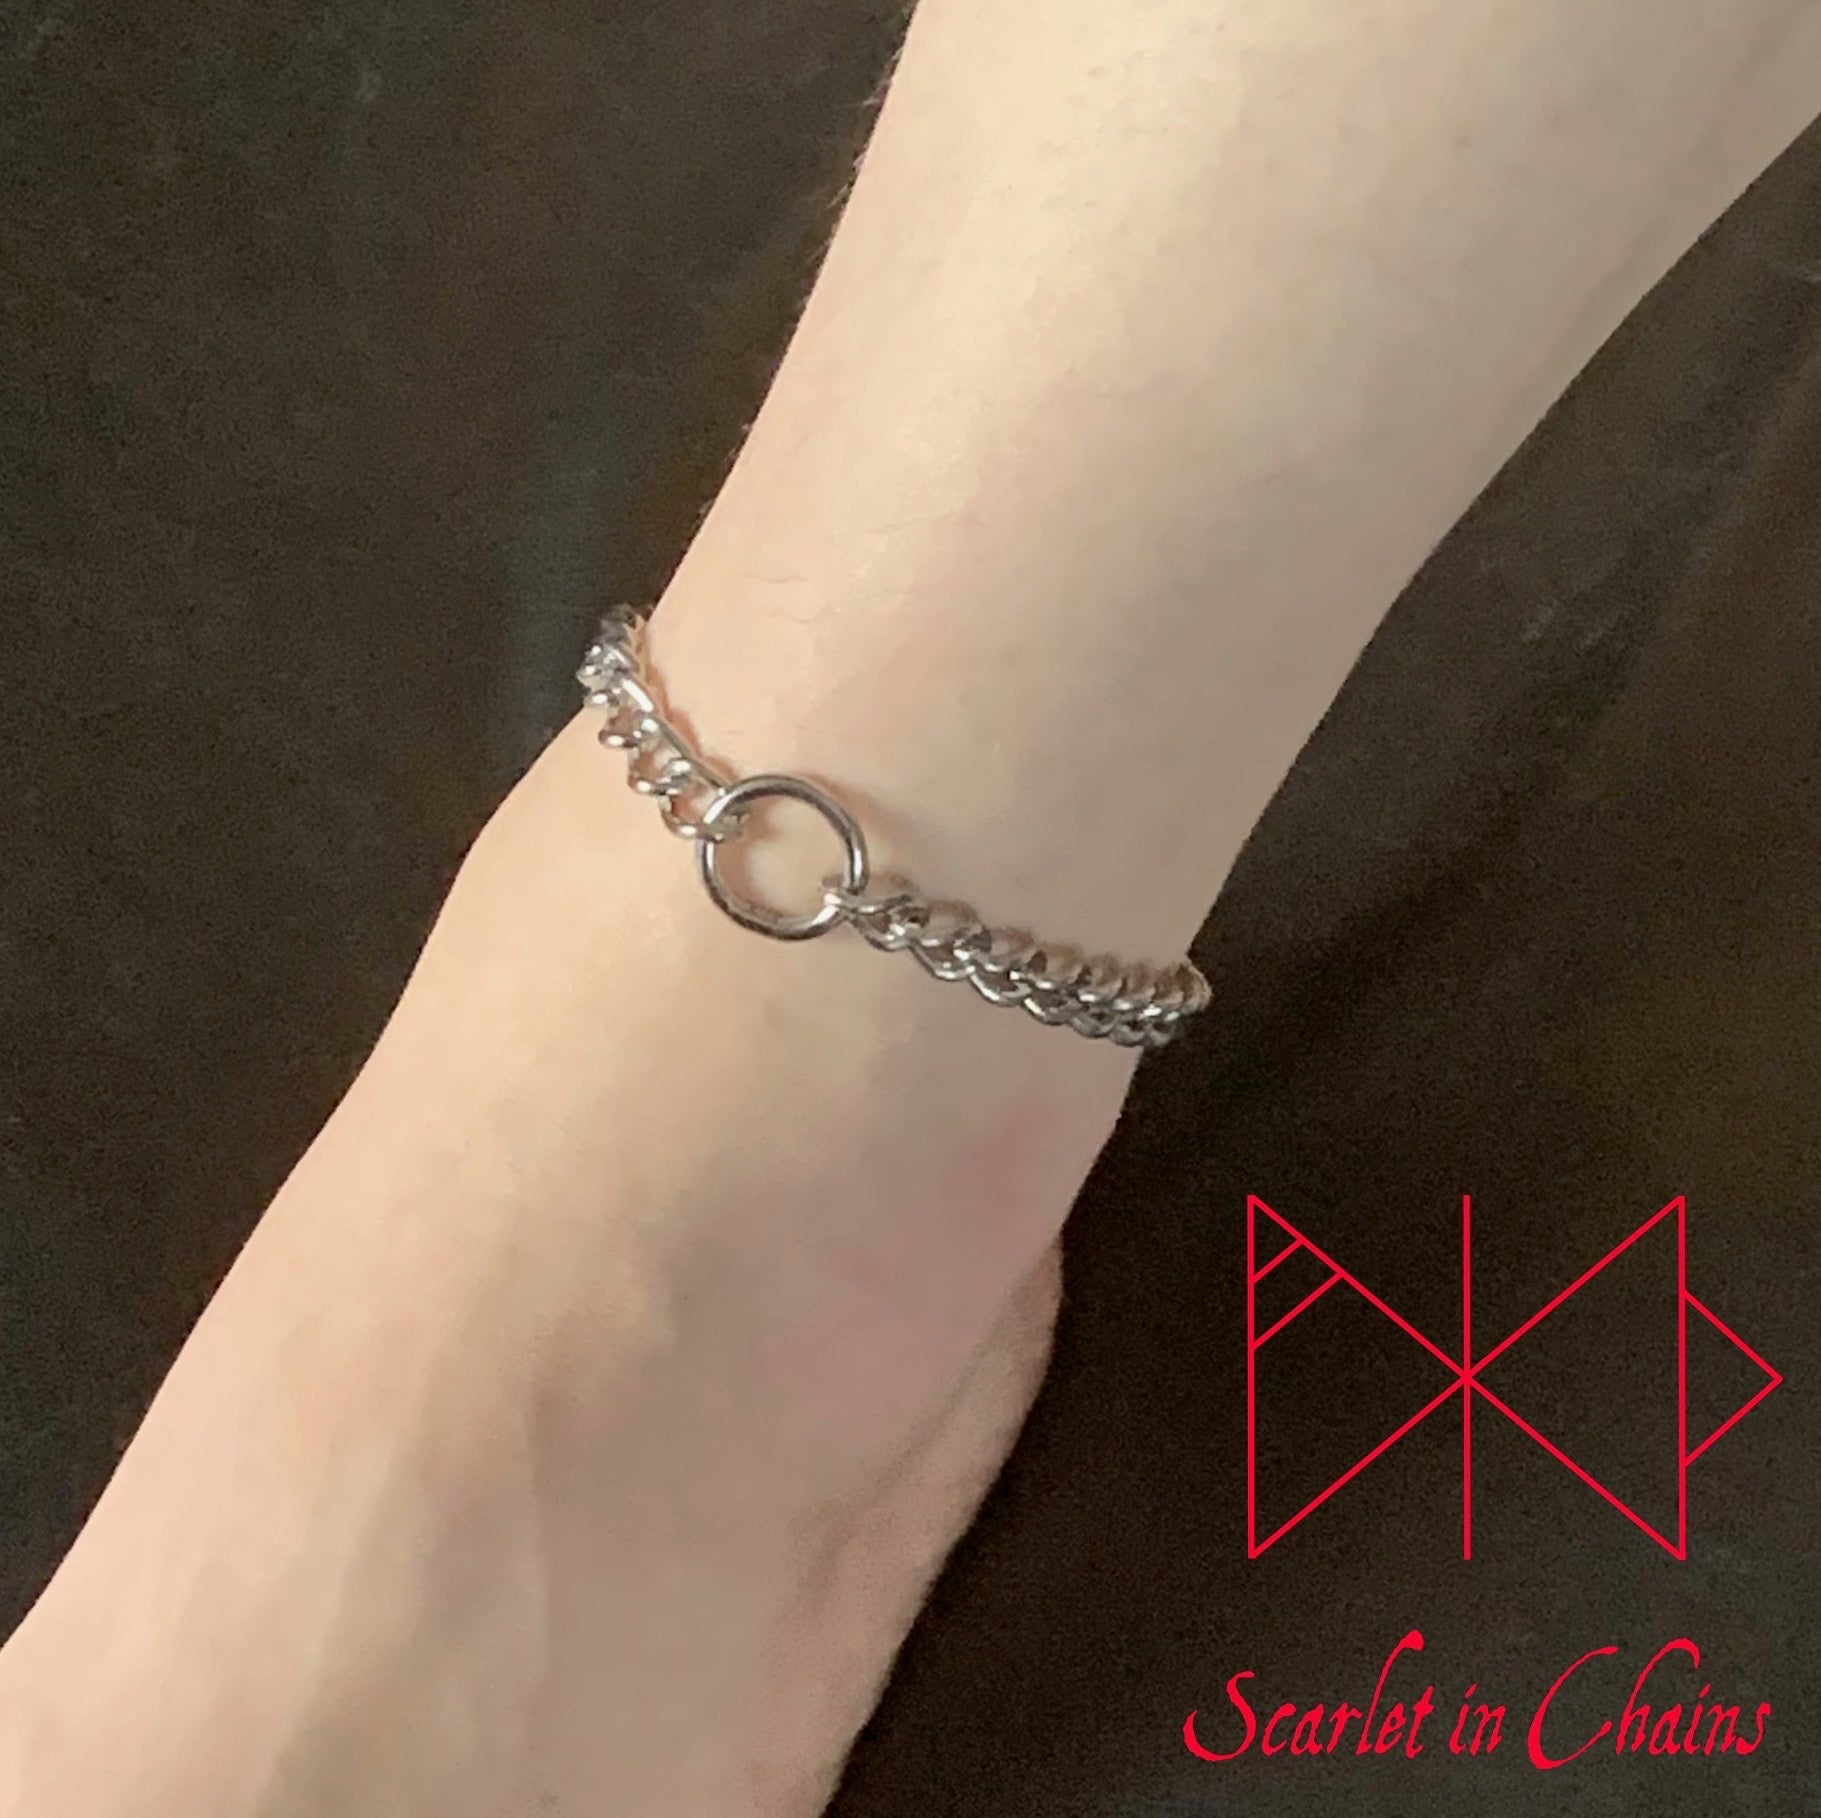 Mini Luna Anklet - Stainless Steel Ankle Cuff - Shown Warn